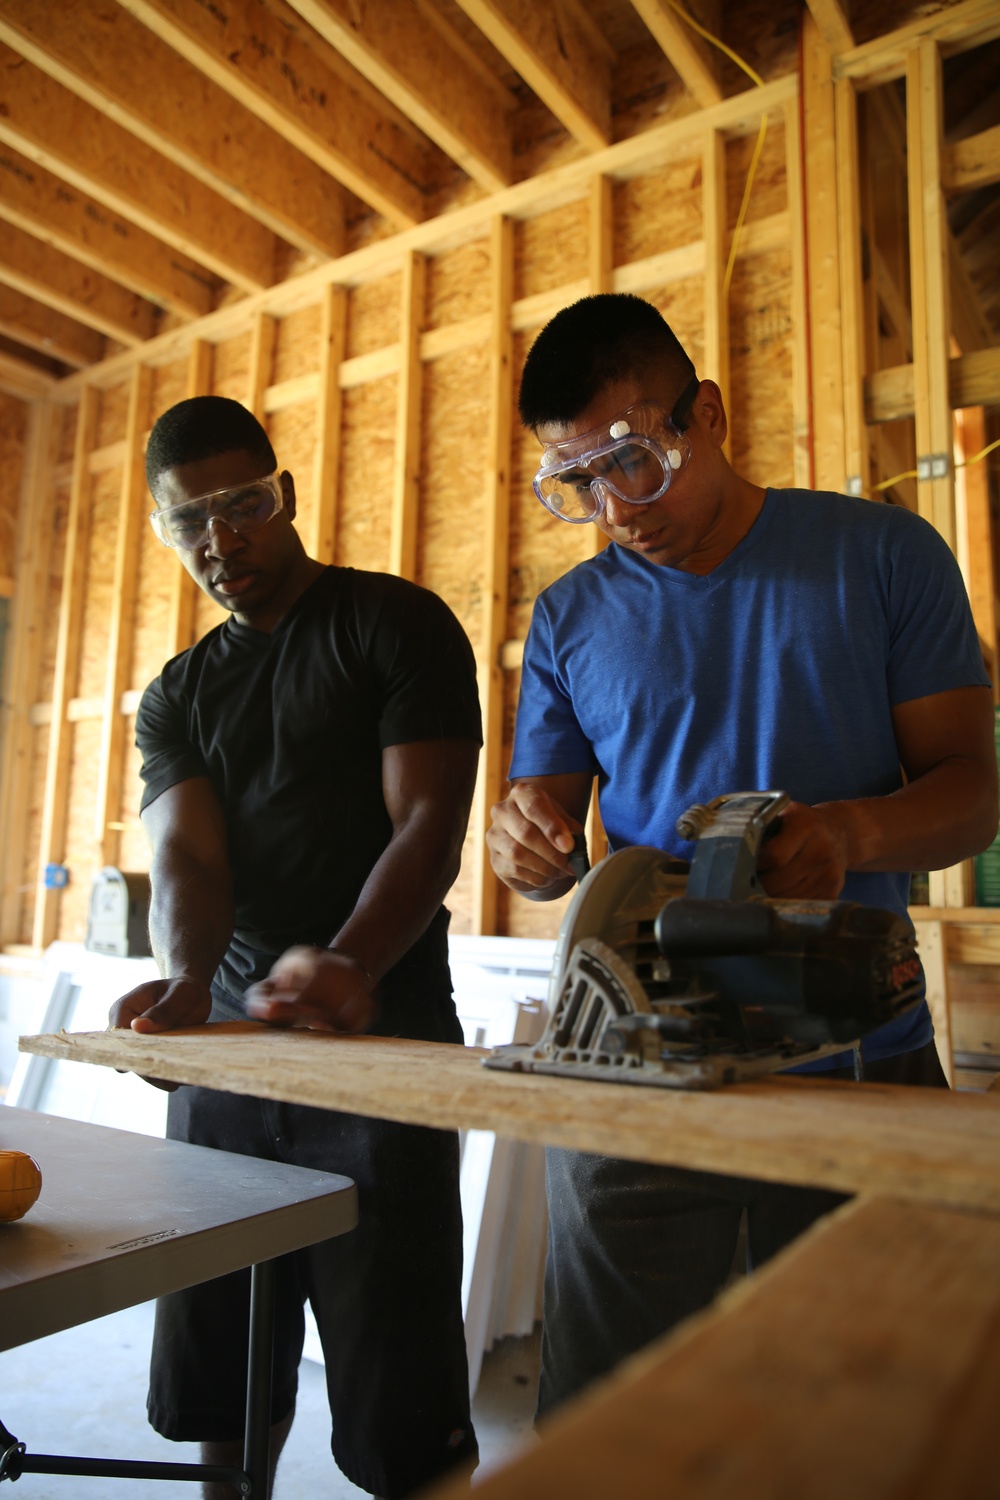 Cherry Point Marines, Sailors build home for Marine family